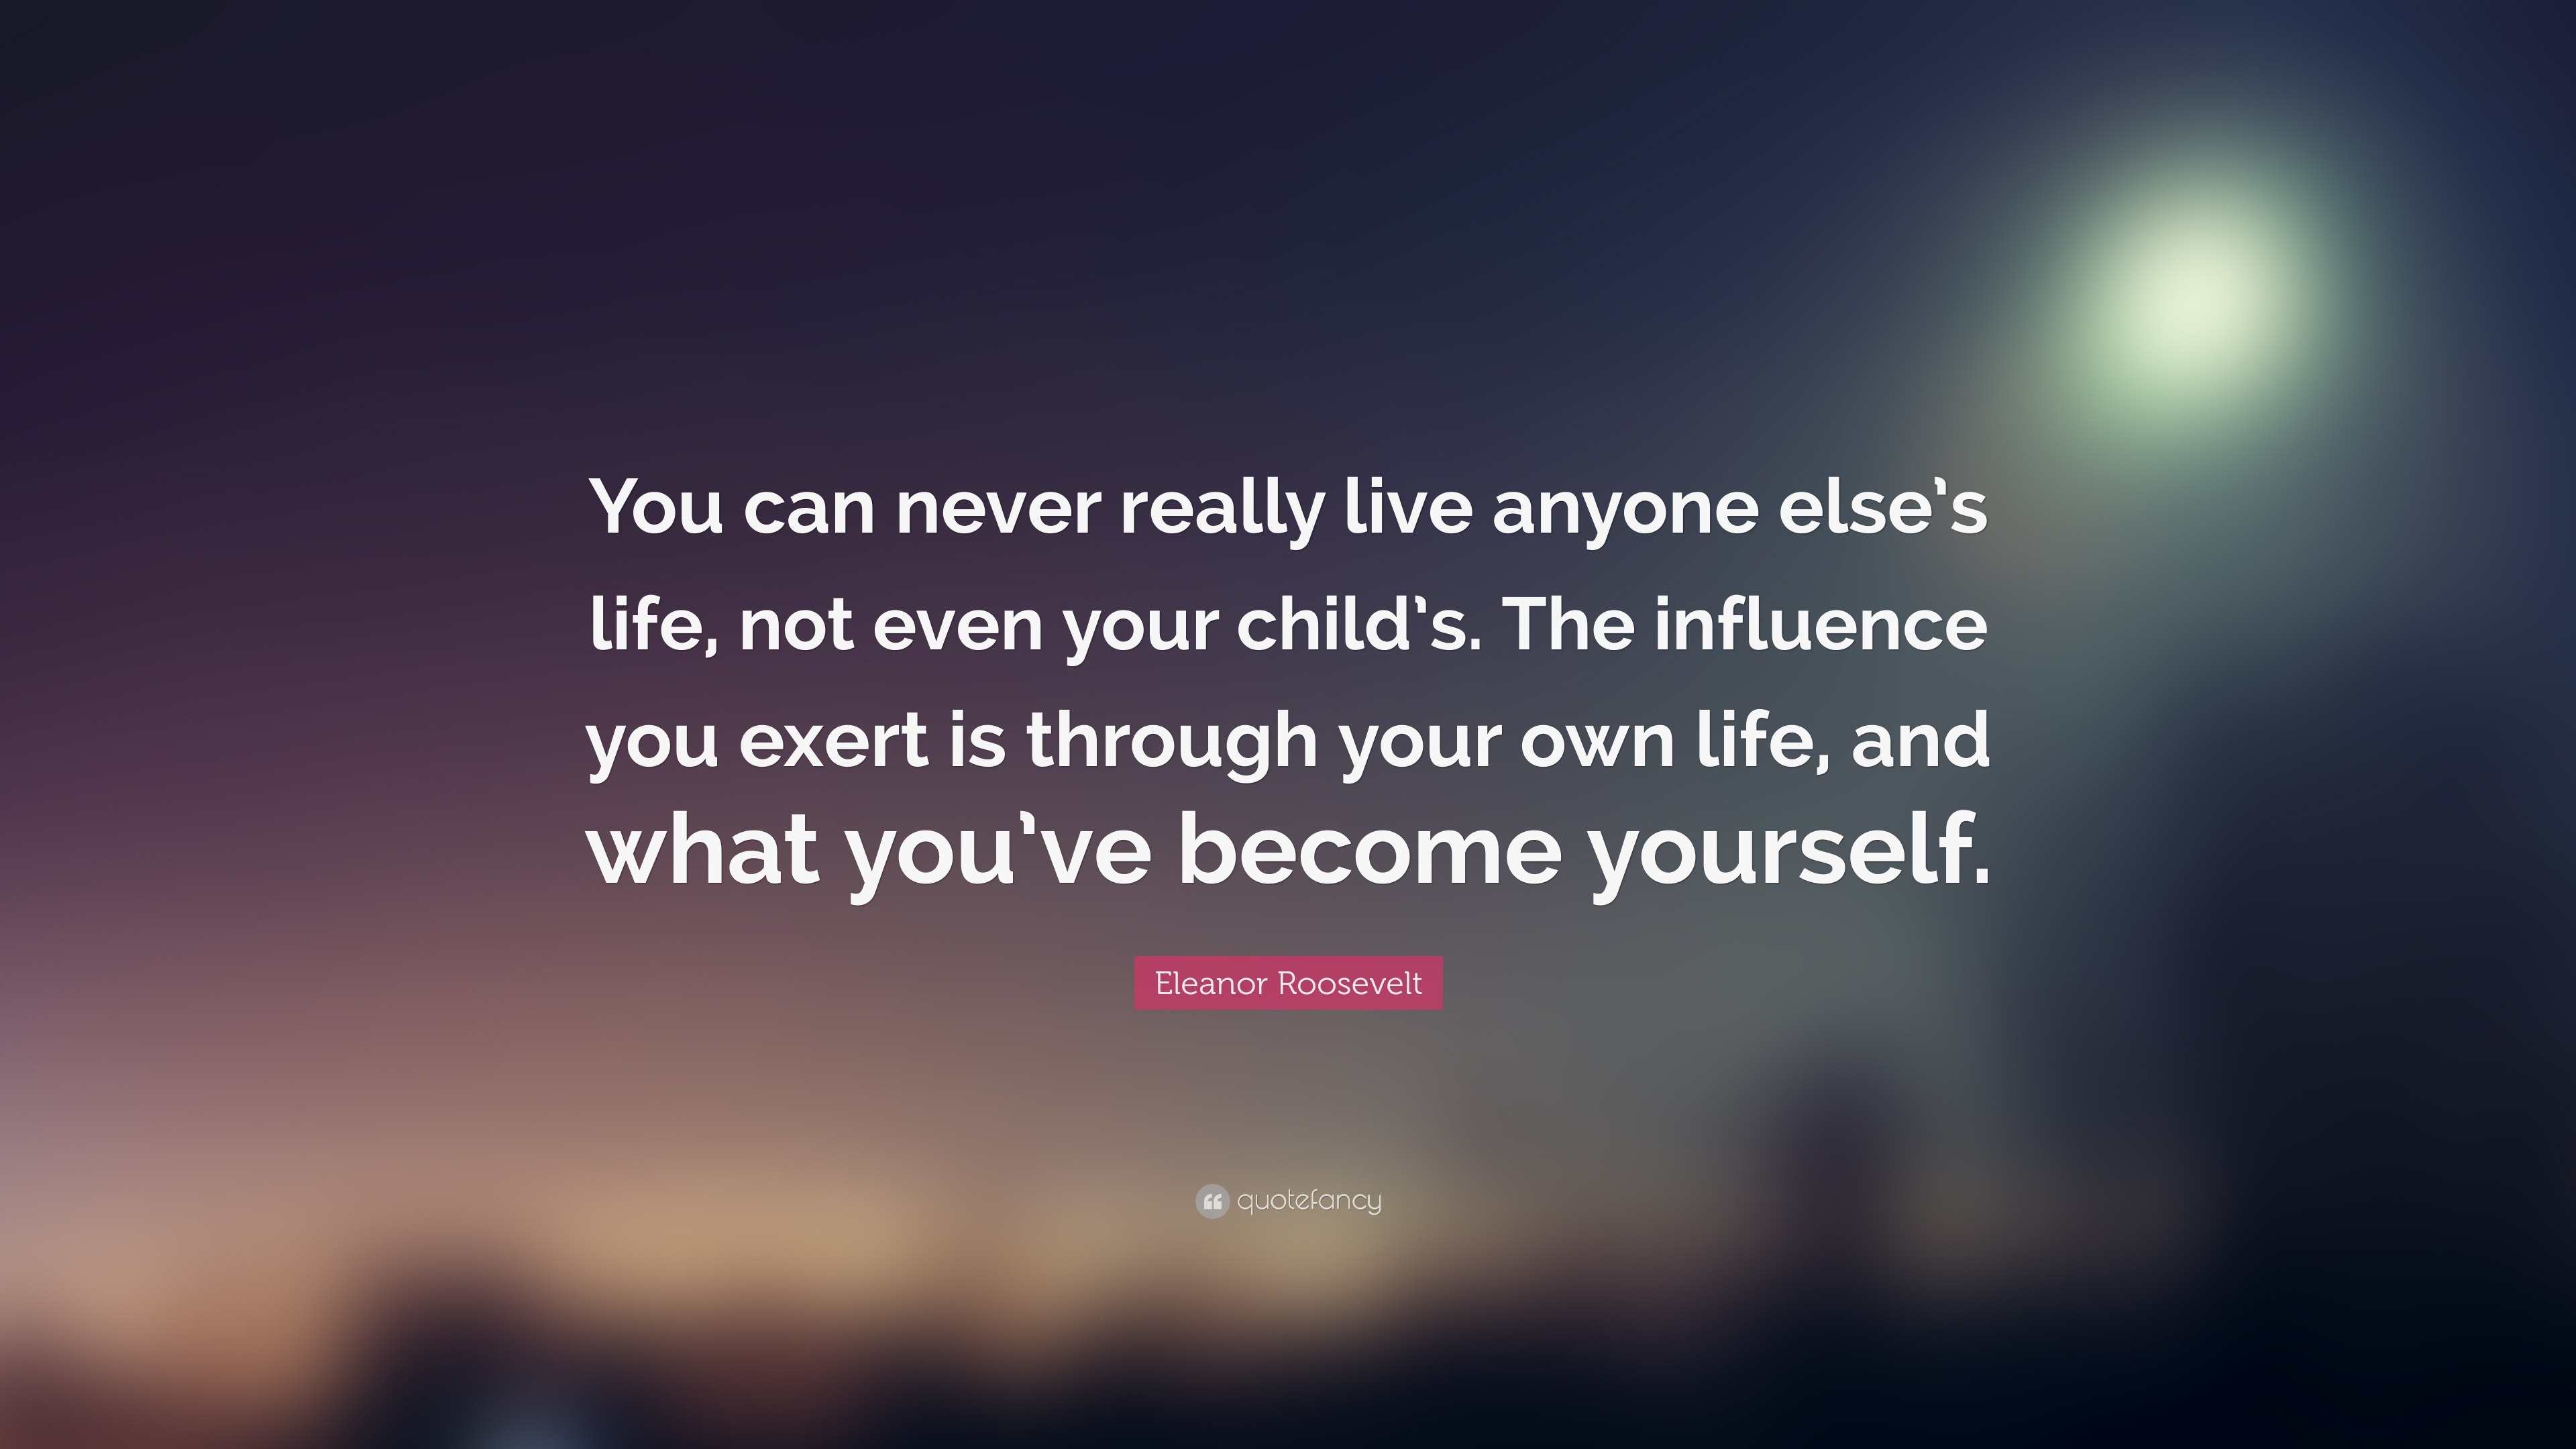 Eleanor Roosevelt Quote You Can Never Really Live Anyone Else S Life Not Even Your Child S The Influence You Exert Is Through Your Own Life A